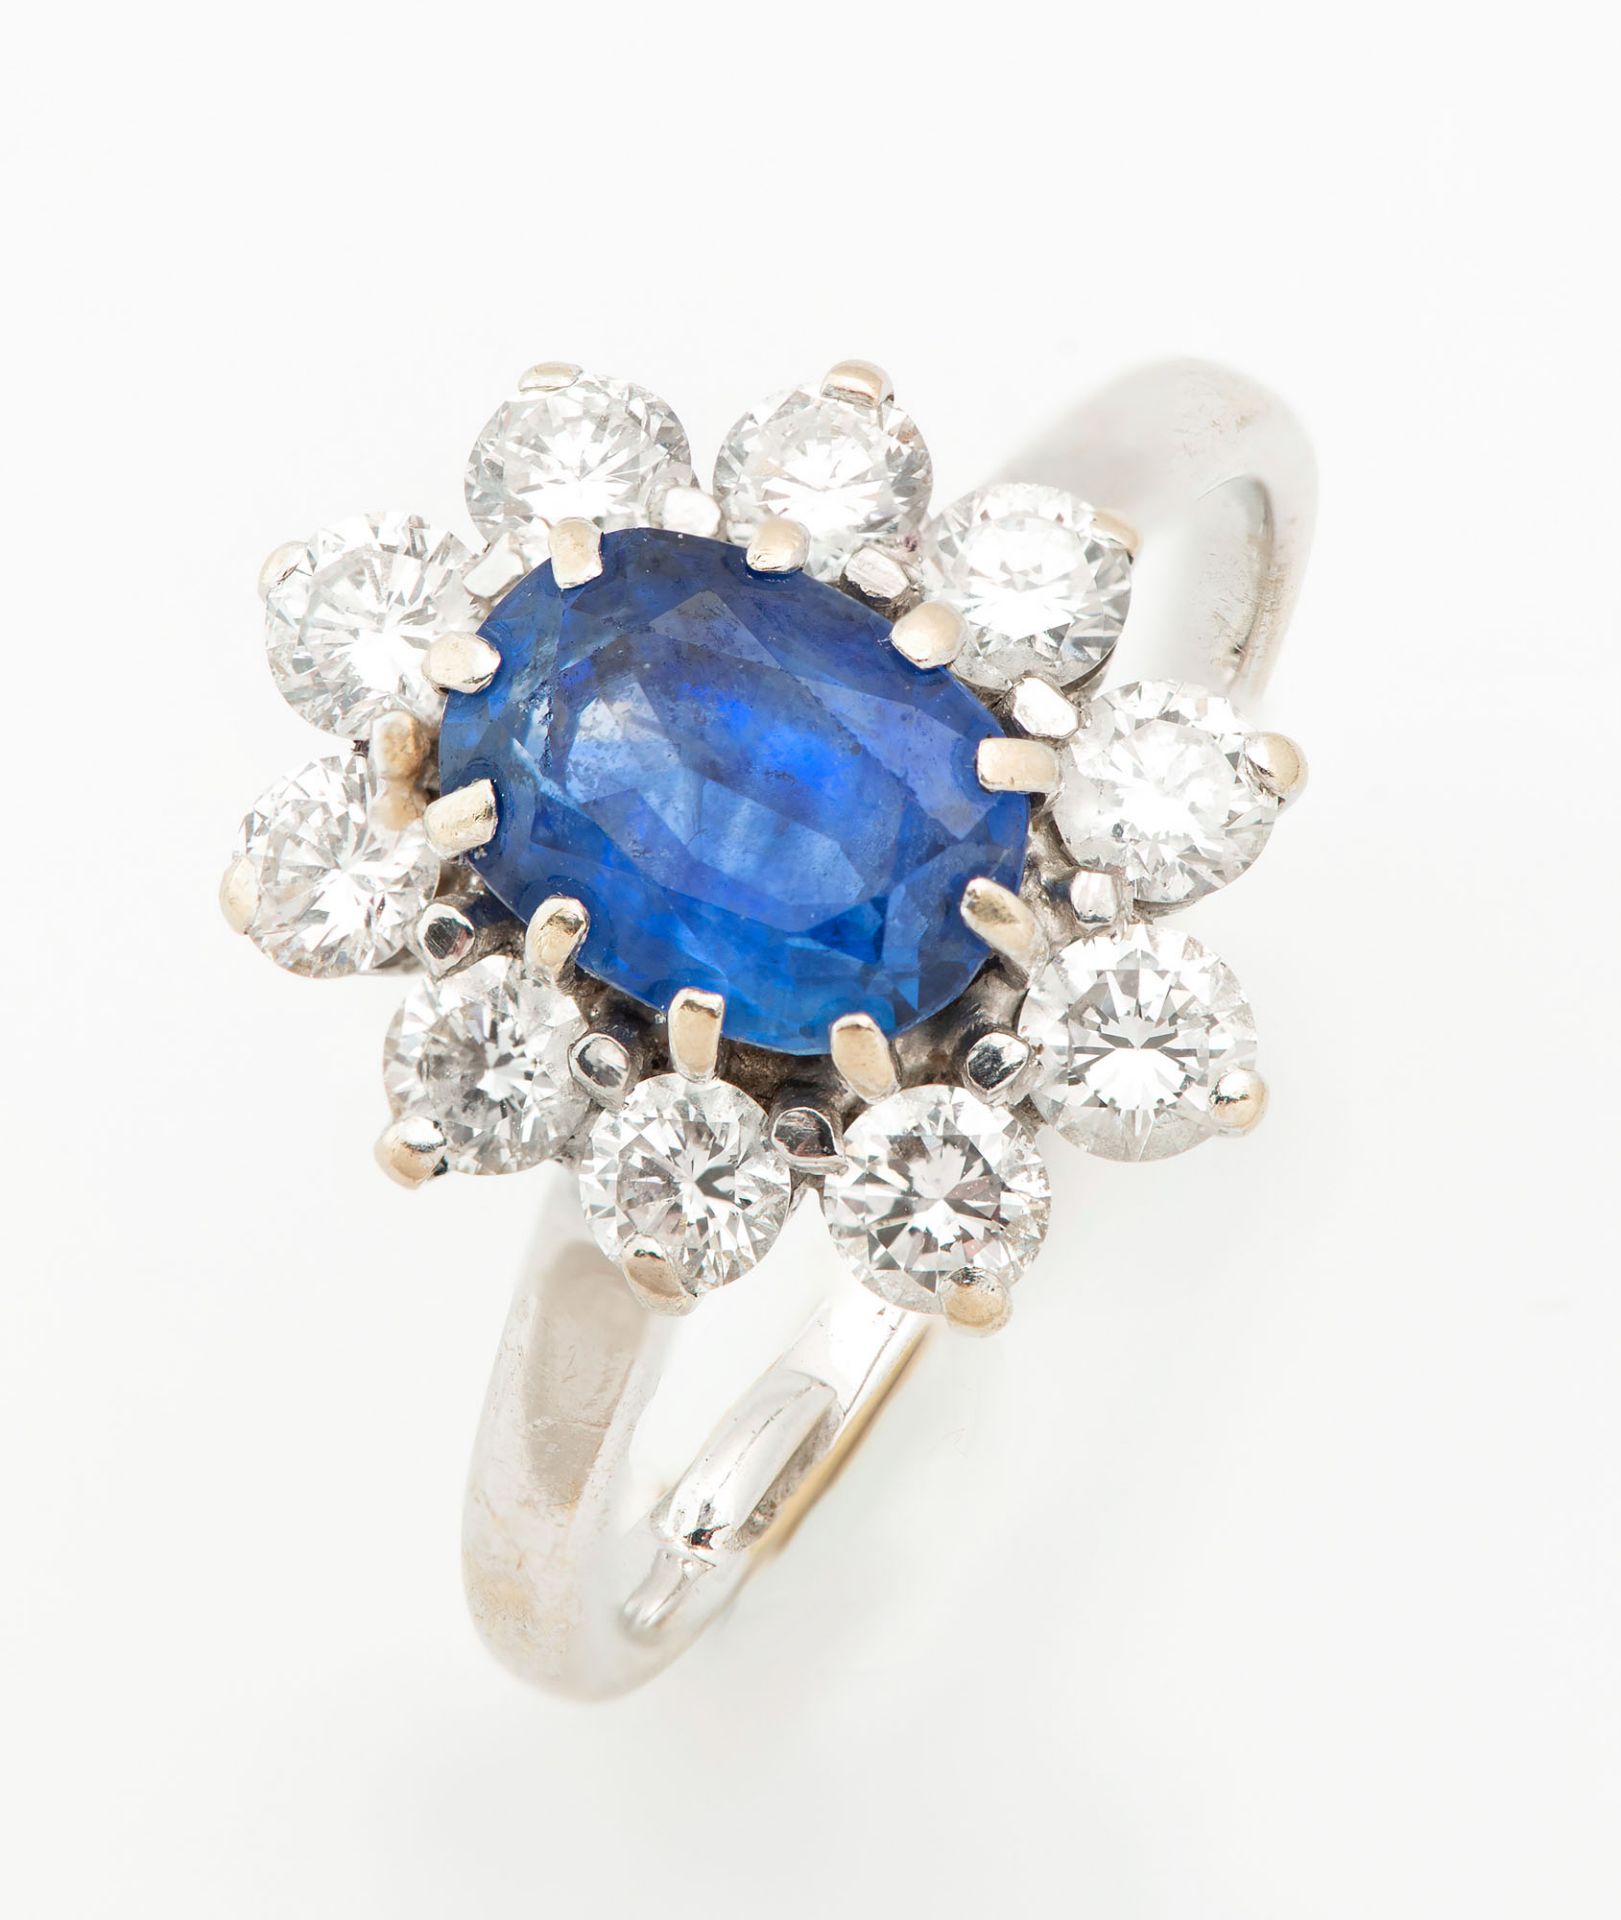 A Fine 18K White Gold Sapphire and Diamond Ring